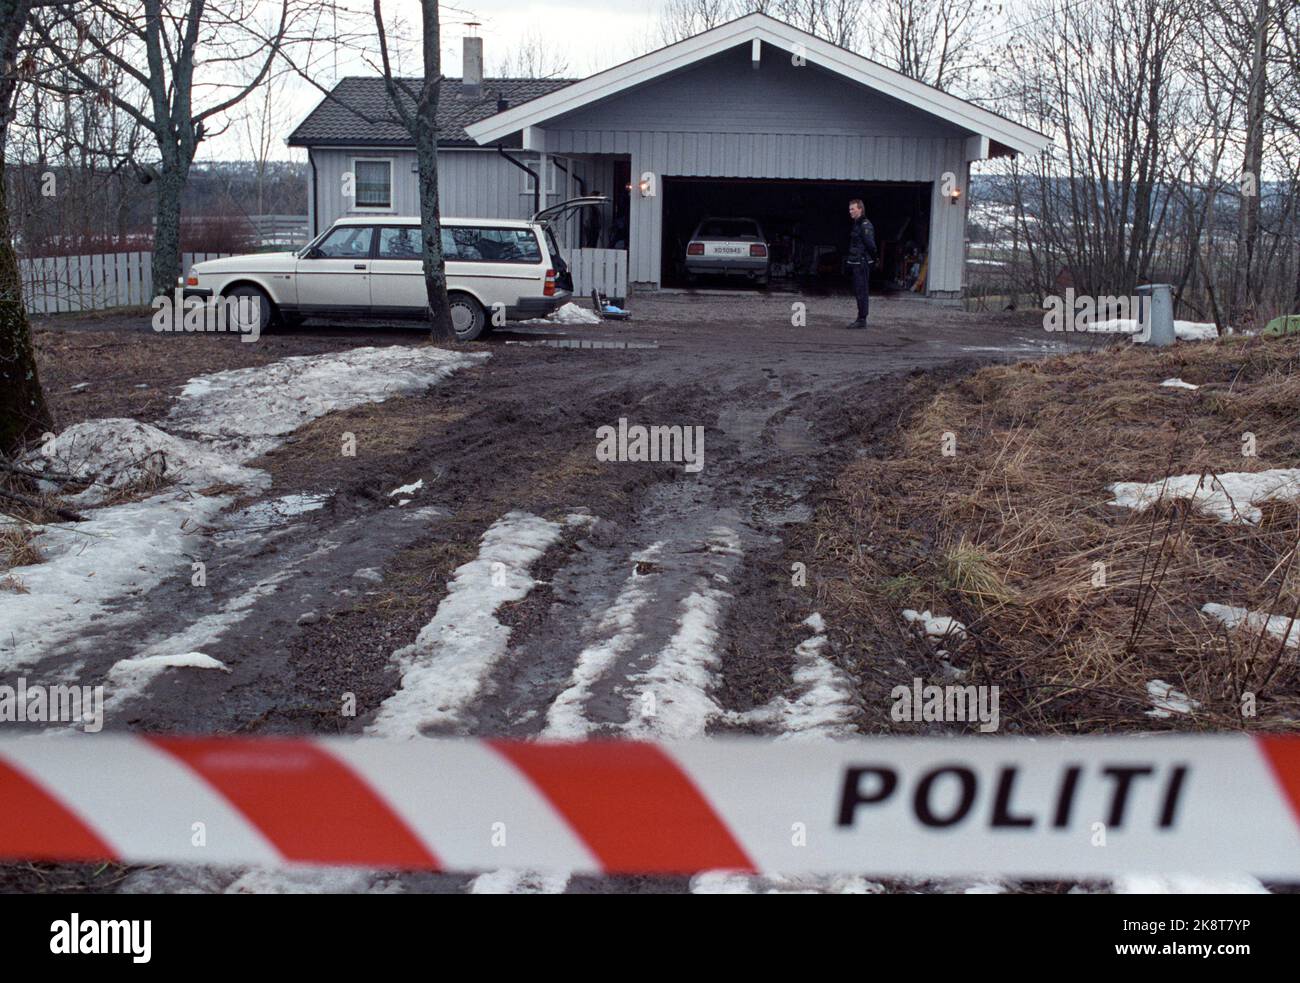 Vestfold, hood on March 23, 1991. Married couples found killed in their own home. The daughter's rebellion against her parents was part of the motif for the tragic double murder of the married couple Anne Marie Skjæggestad (40) and Dag Skjæggestad (43) at the hood in Ramnes Municipality in Vestfold. The daughter's 17 -year -old girlfriend performed the killing that the two together had planned. Photo: Annica Thomsson / NTB / NTB Stock Photo